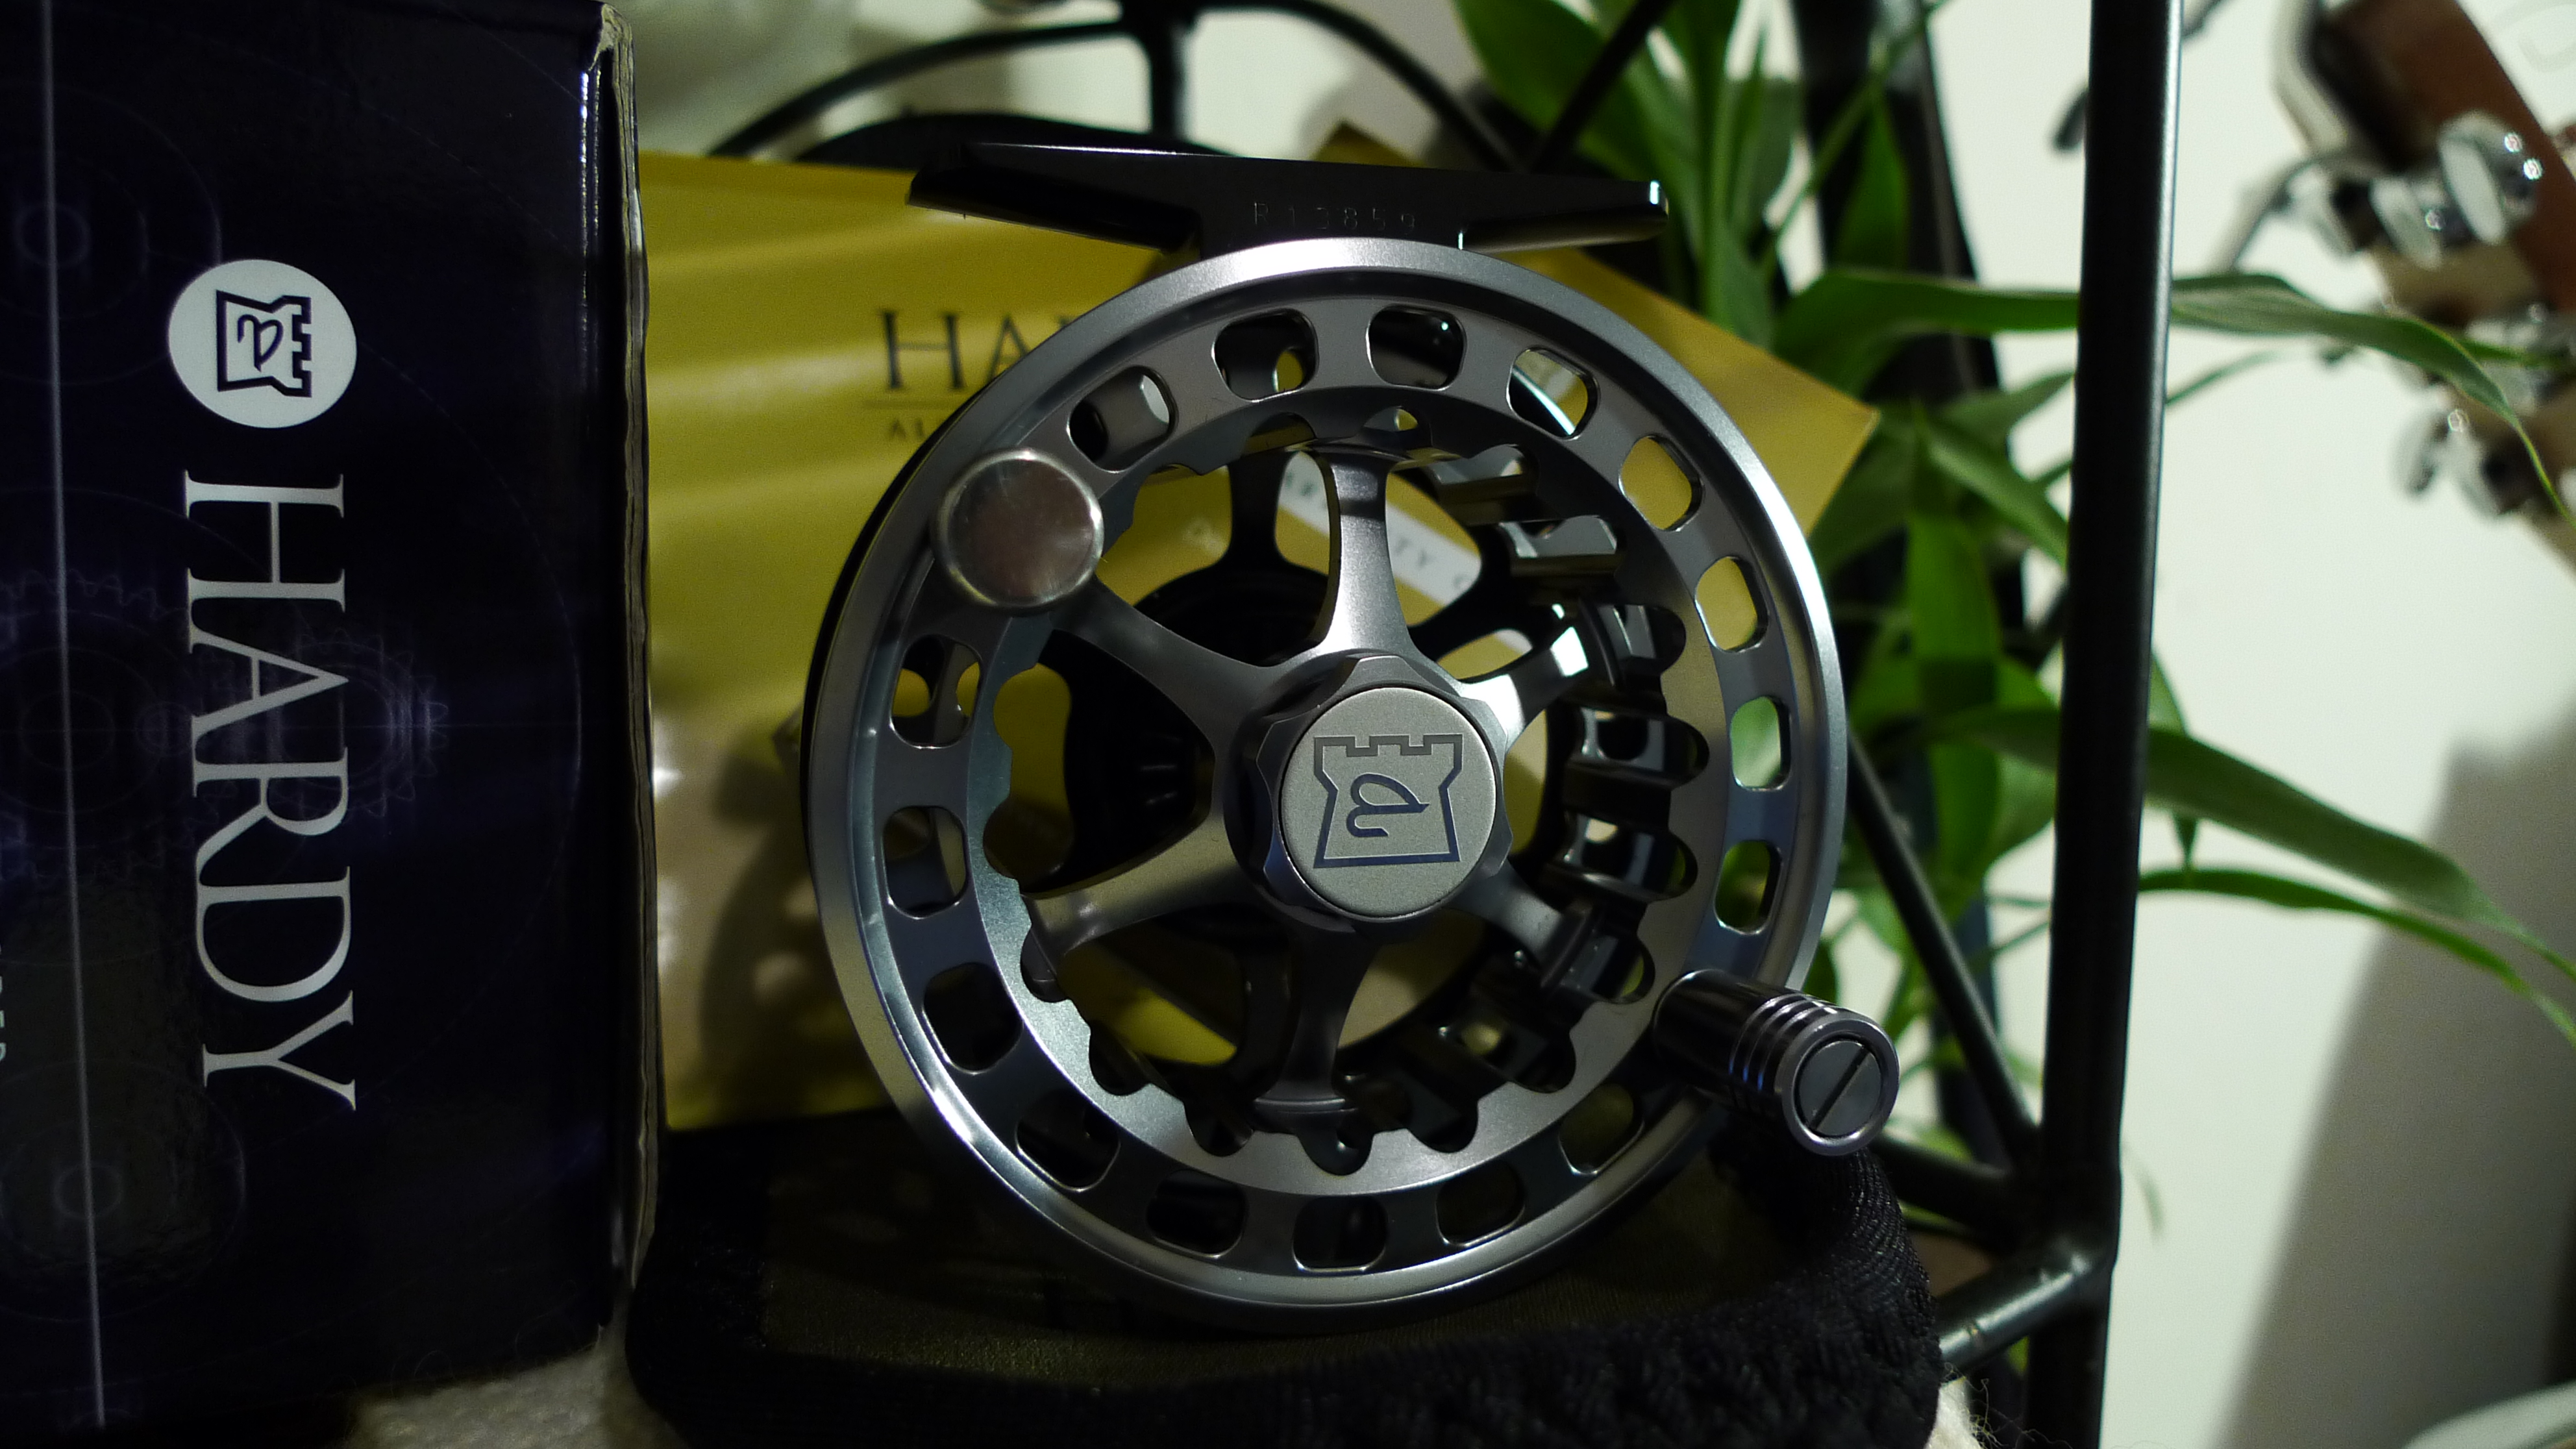 Hardy Ultralite CC 1000 – Wanders With Trout